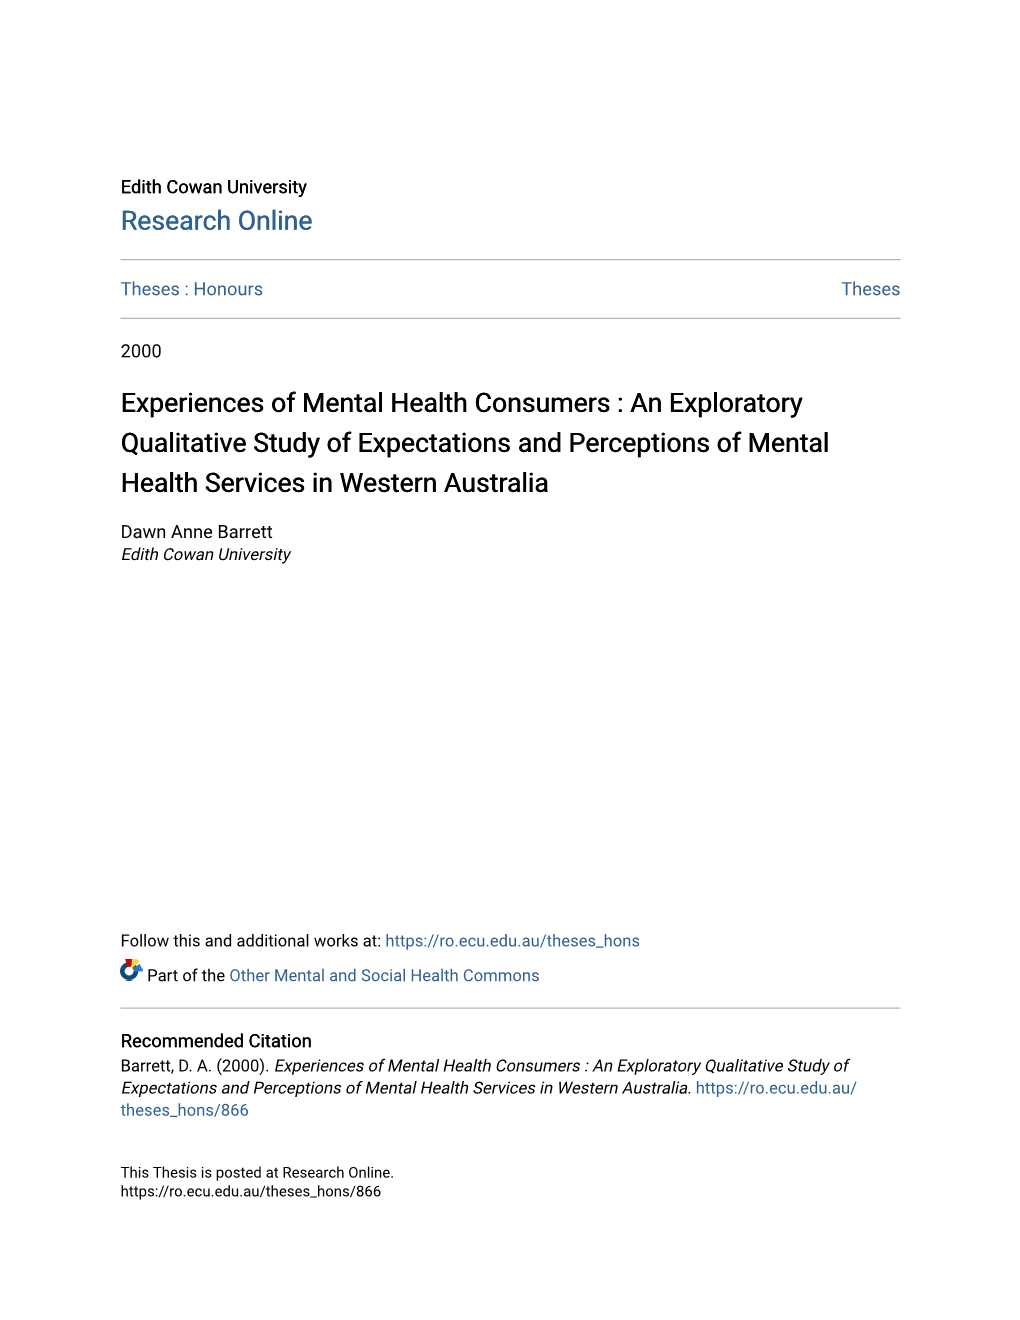 Experiences of Mental Health Consumers : an Exploratory Qualitative Study of Expectations and Perceptions of Mental Health Services in Western Australia